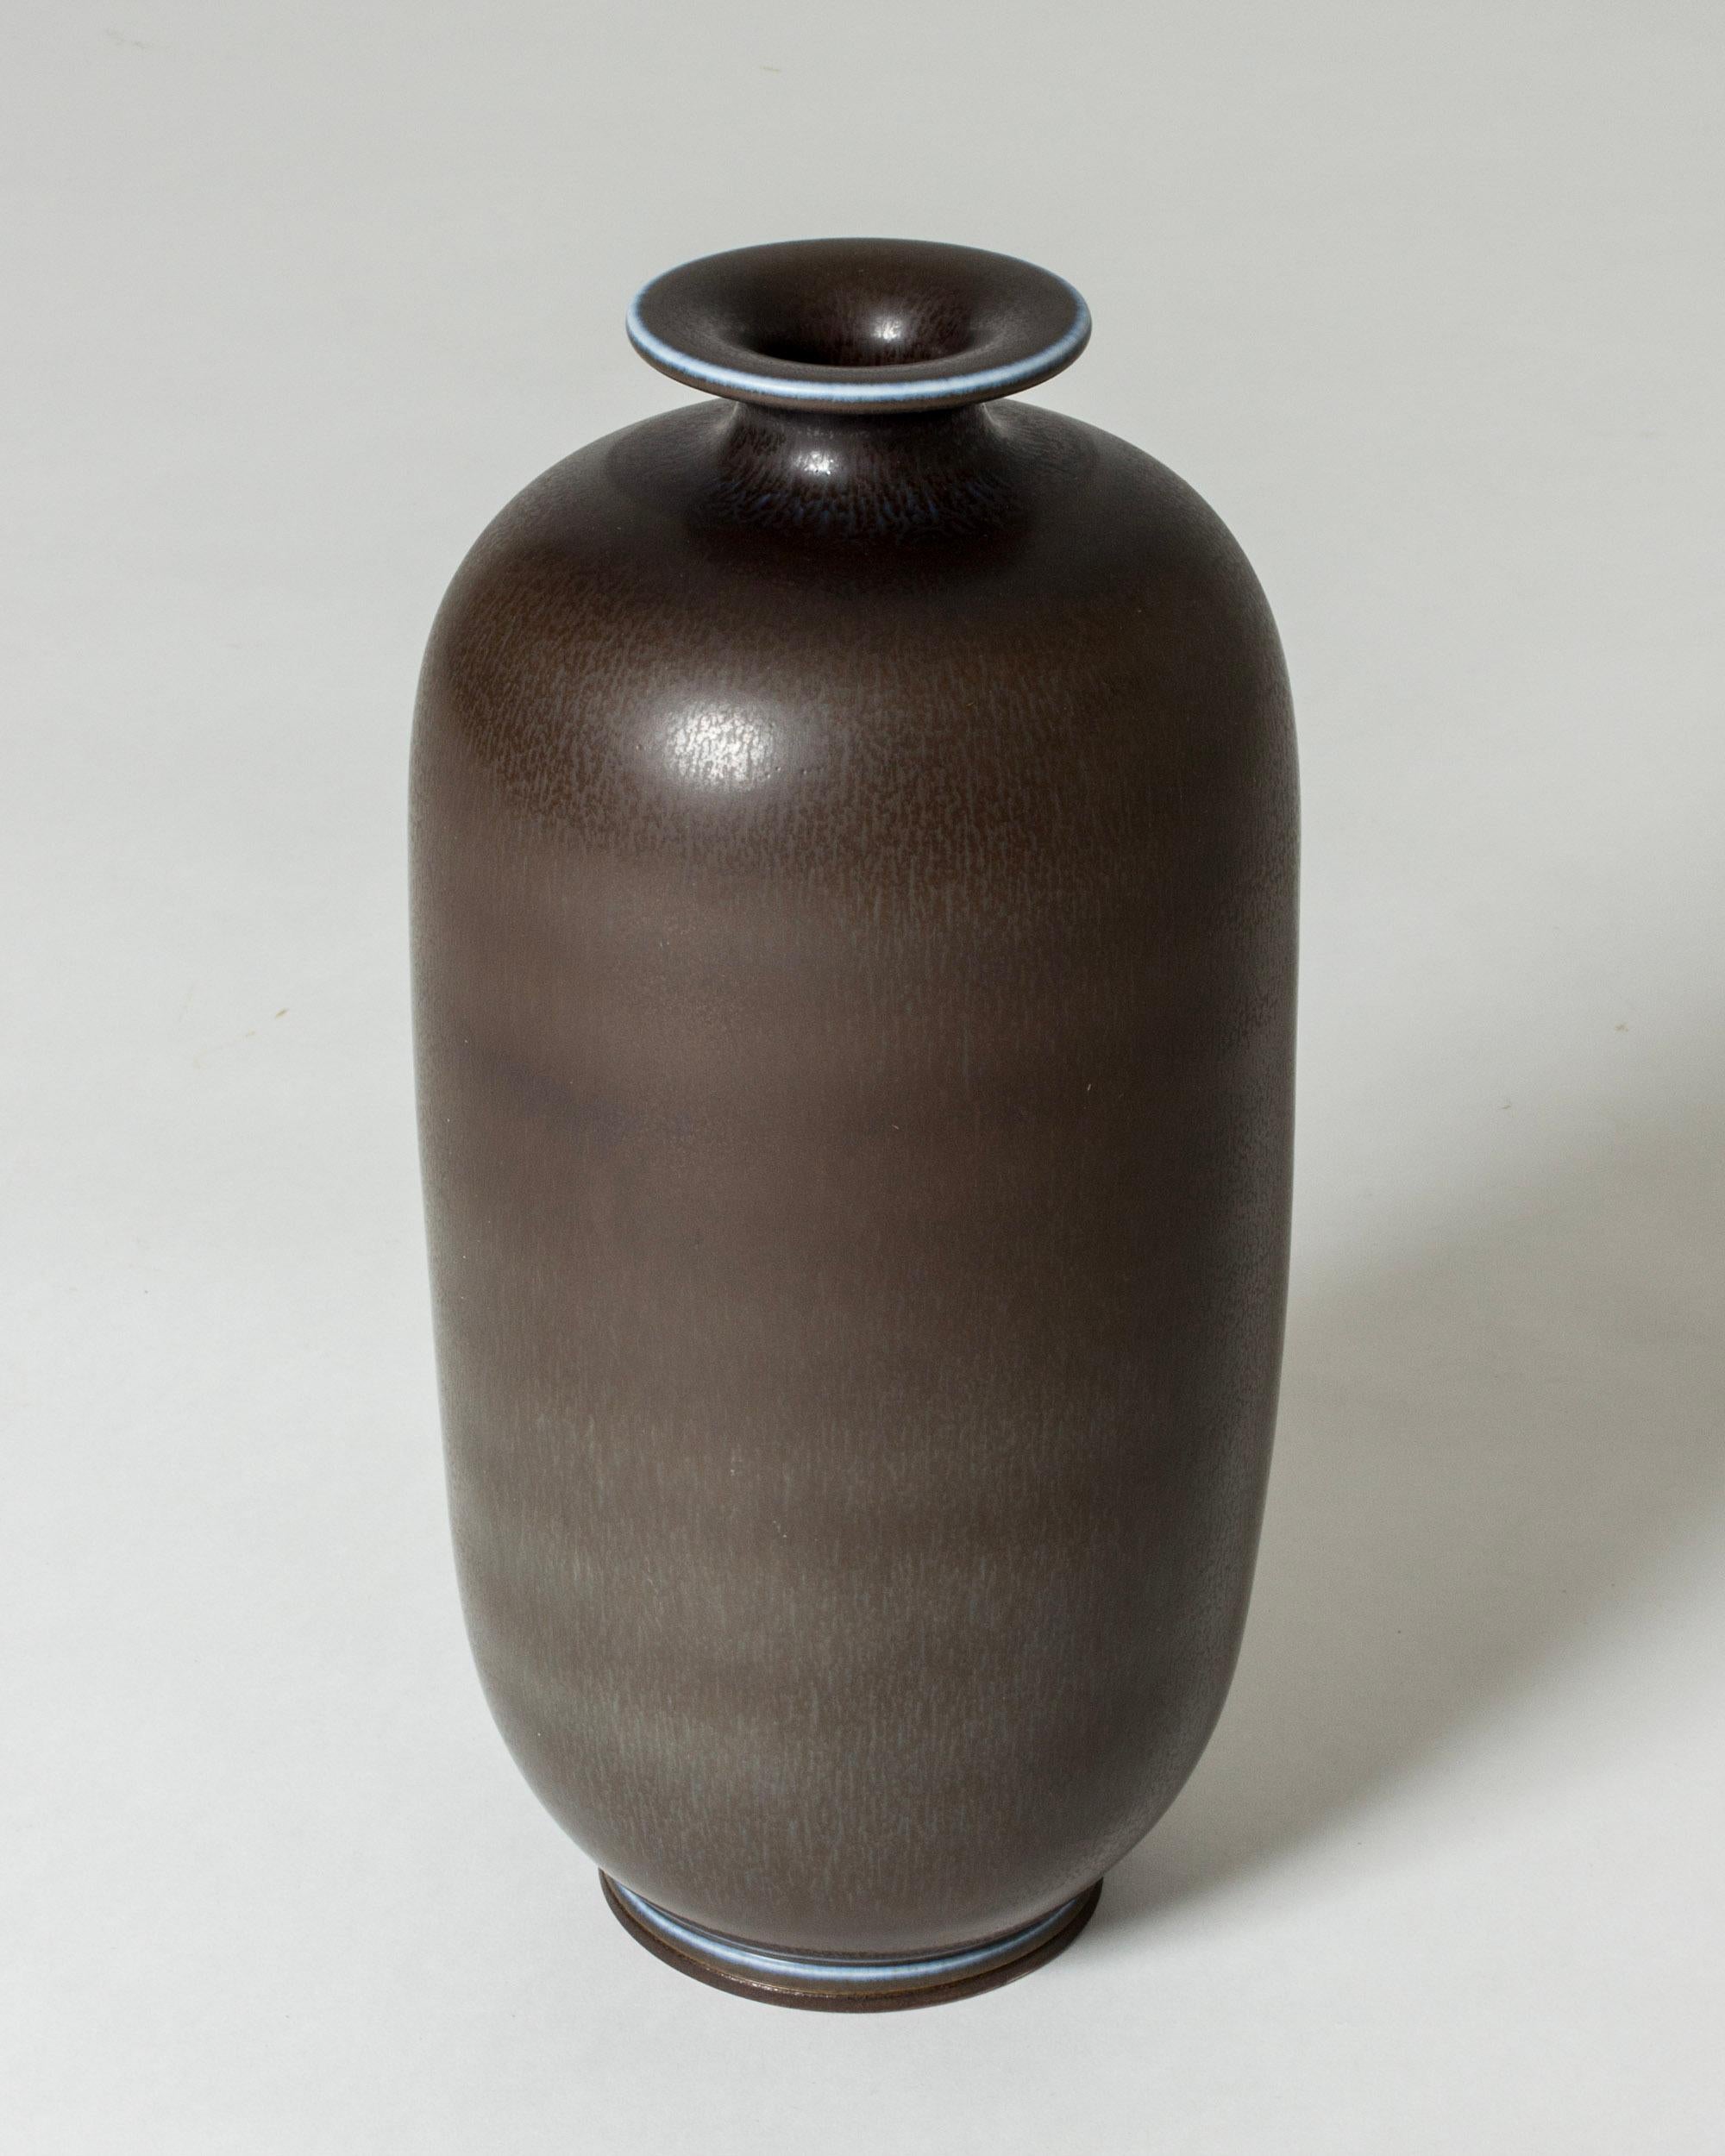 Elegant stoneware vase by Berndt Friberg in a tall, stately form. Brown hare’s fur glaze with blue around the rim and base.

Berndt Friberg was a Swedish ceramicist, renowned for his stoneware vases and vessels for Gustavsberg. His pure, composed